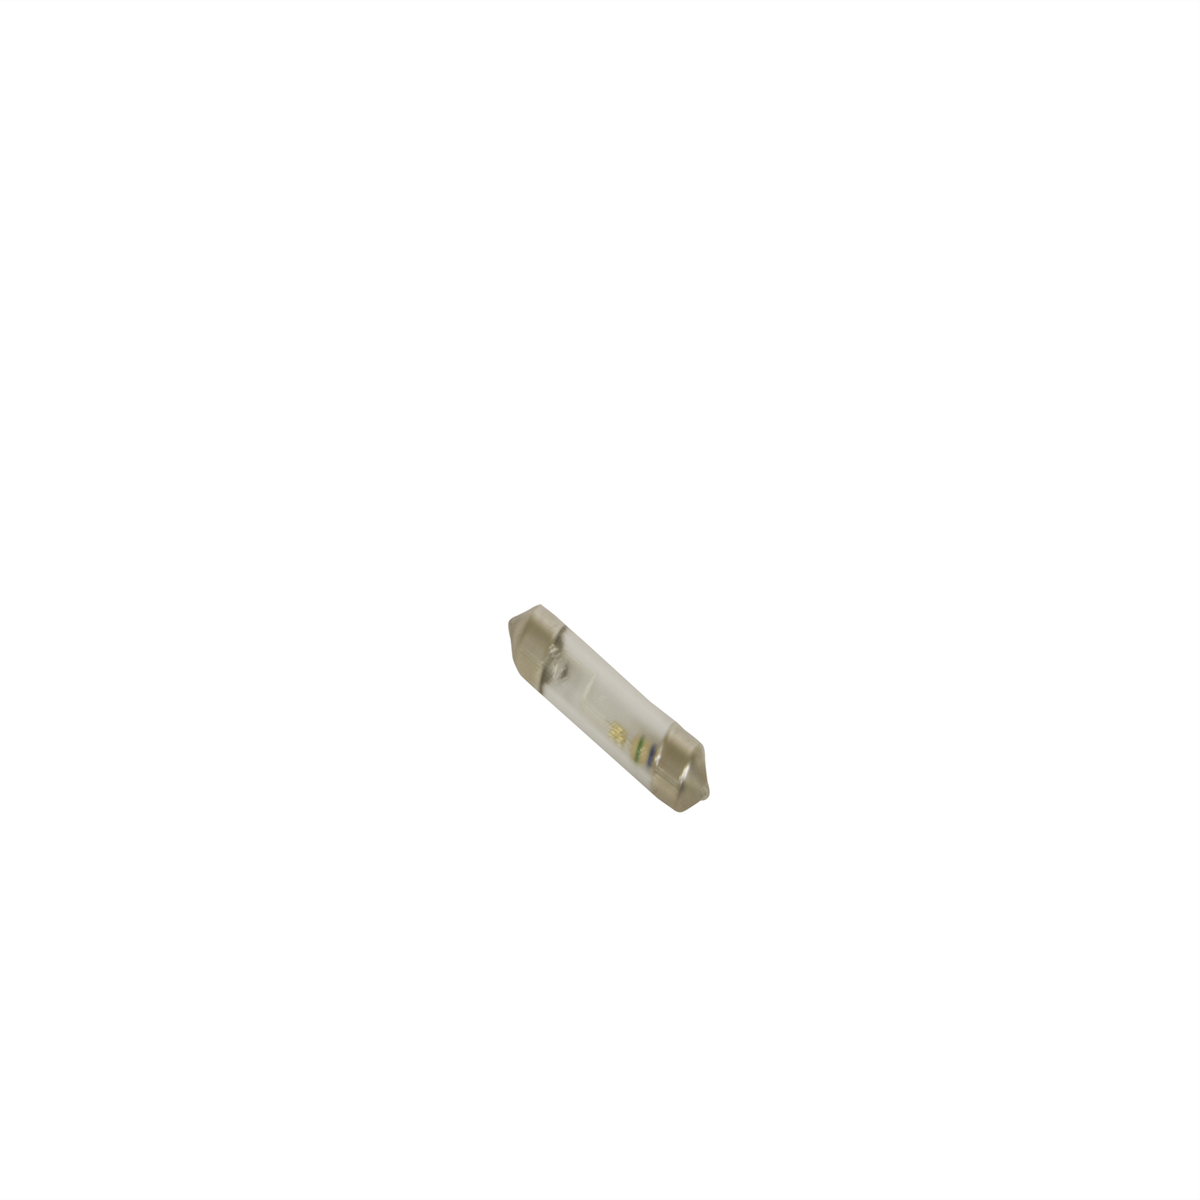 Replacement Bulb for 24550 Circuit Tester